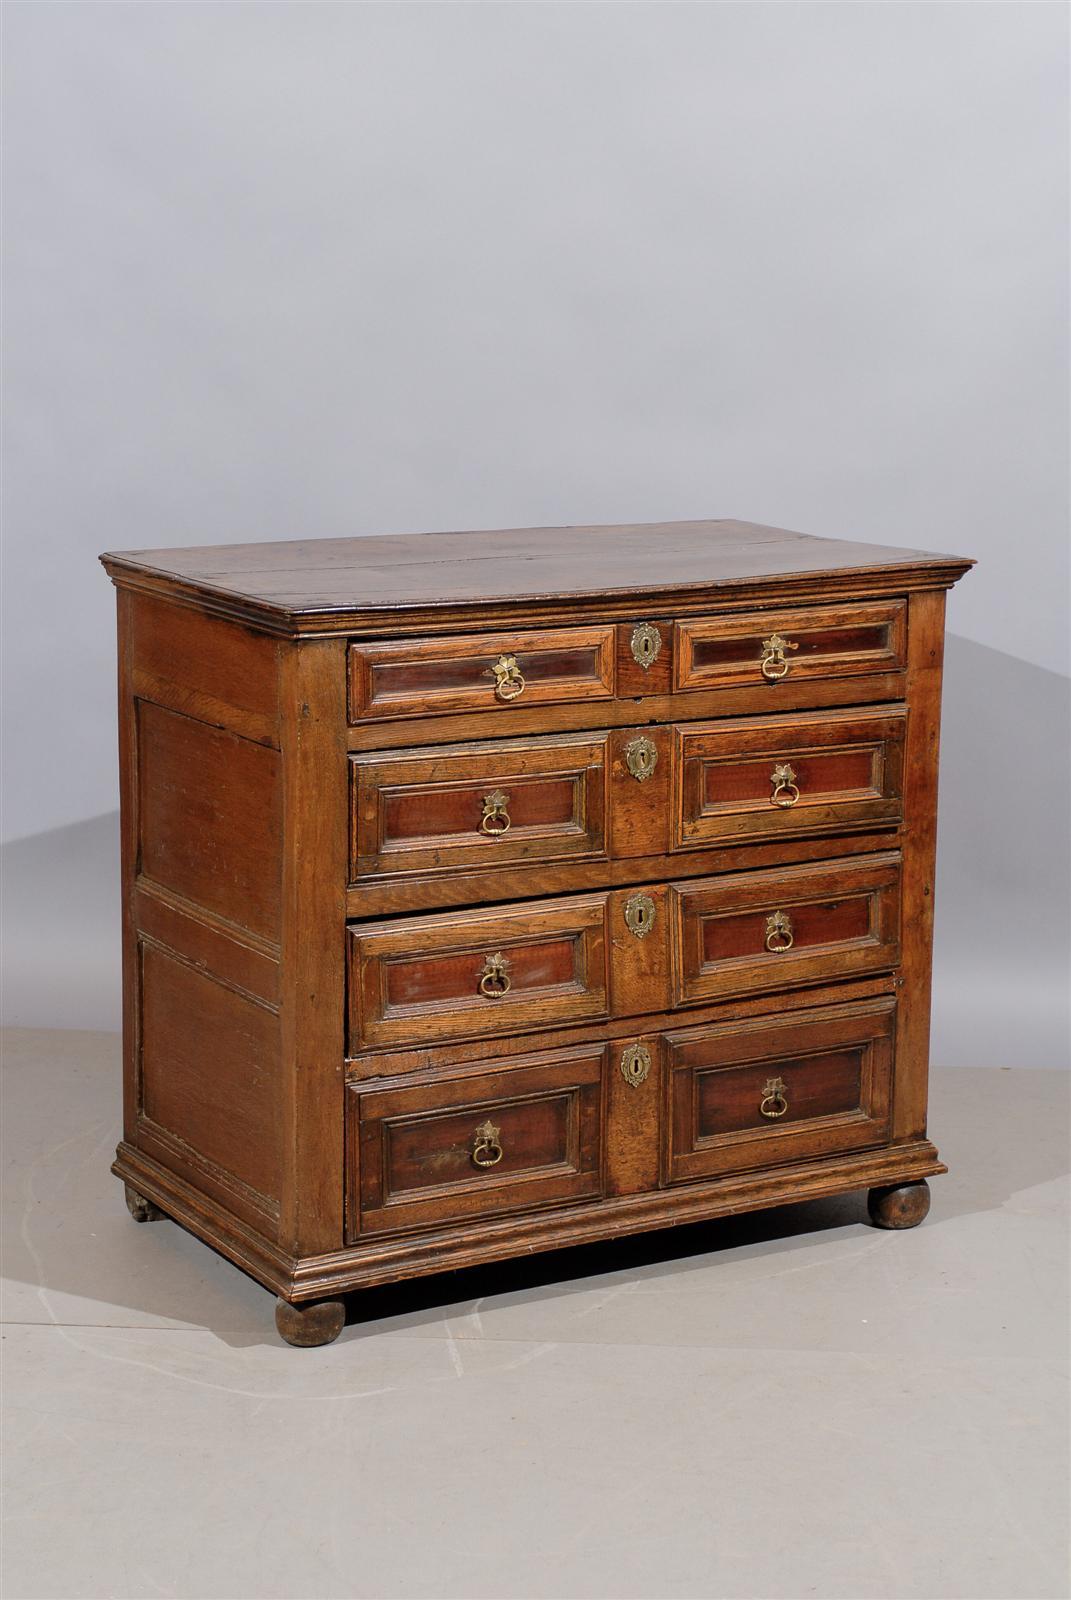 An 18th century English Jacobean style oak chest with four graduated drawers, paneled ends and bun feet.